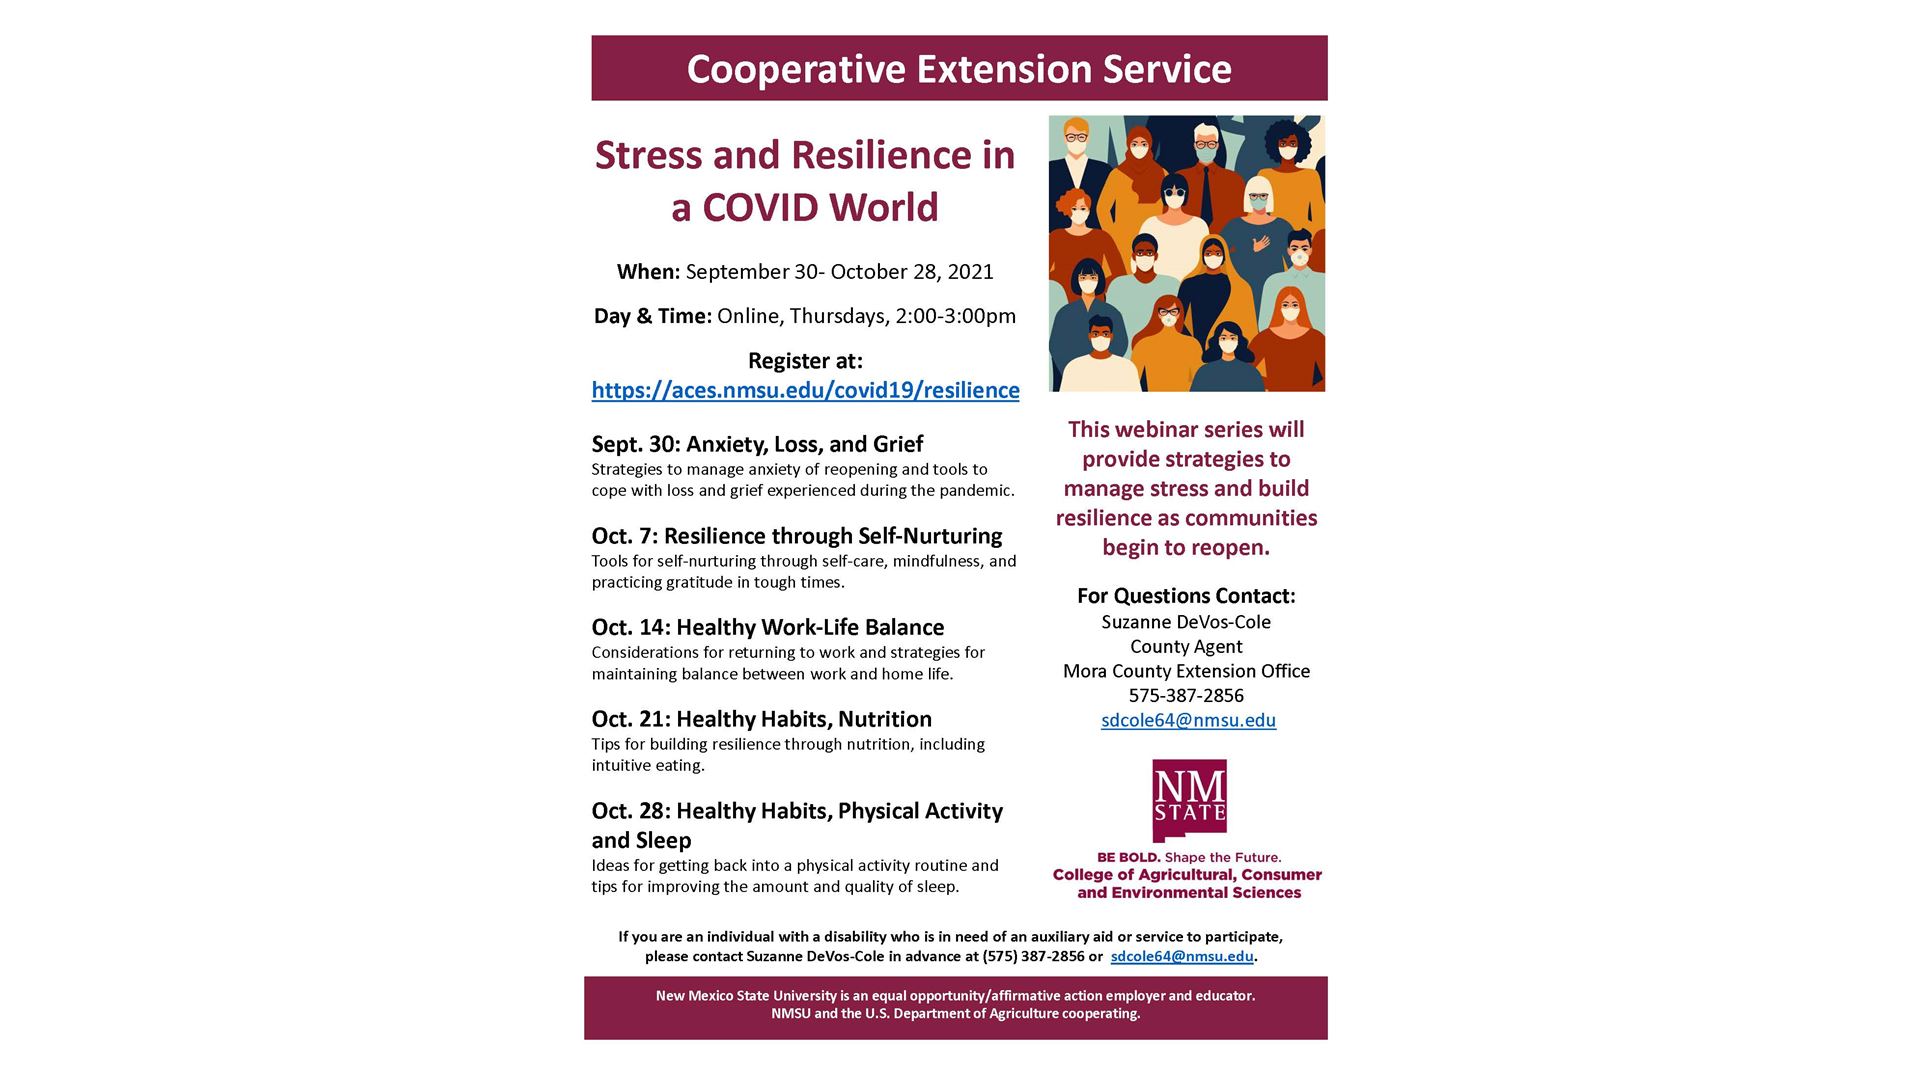 NMSU’s Cooperative Extension to host stress, resilience webinar series